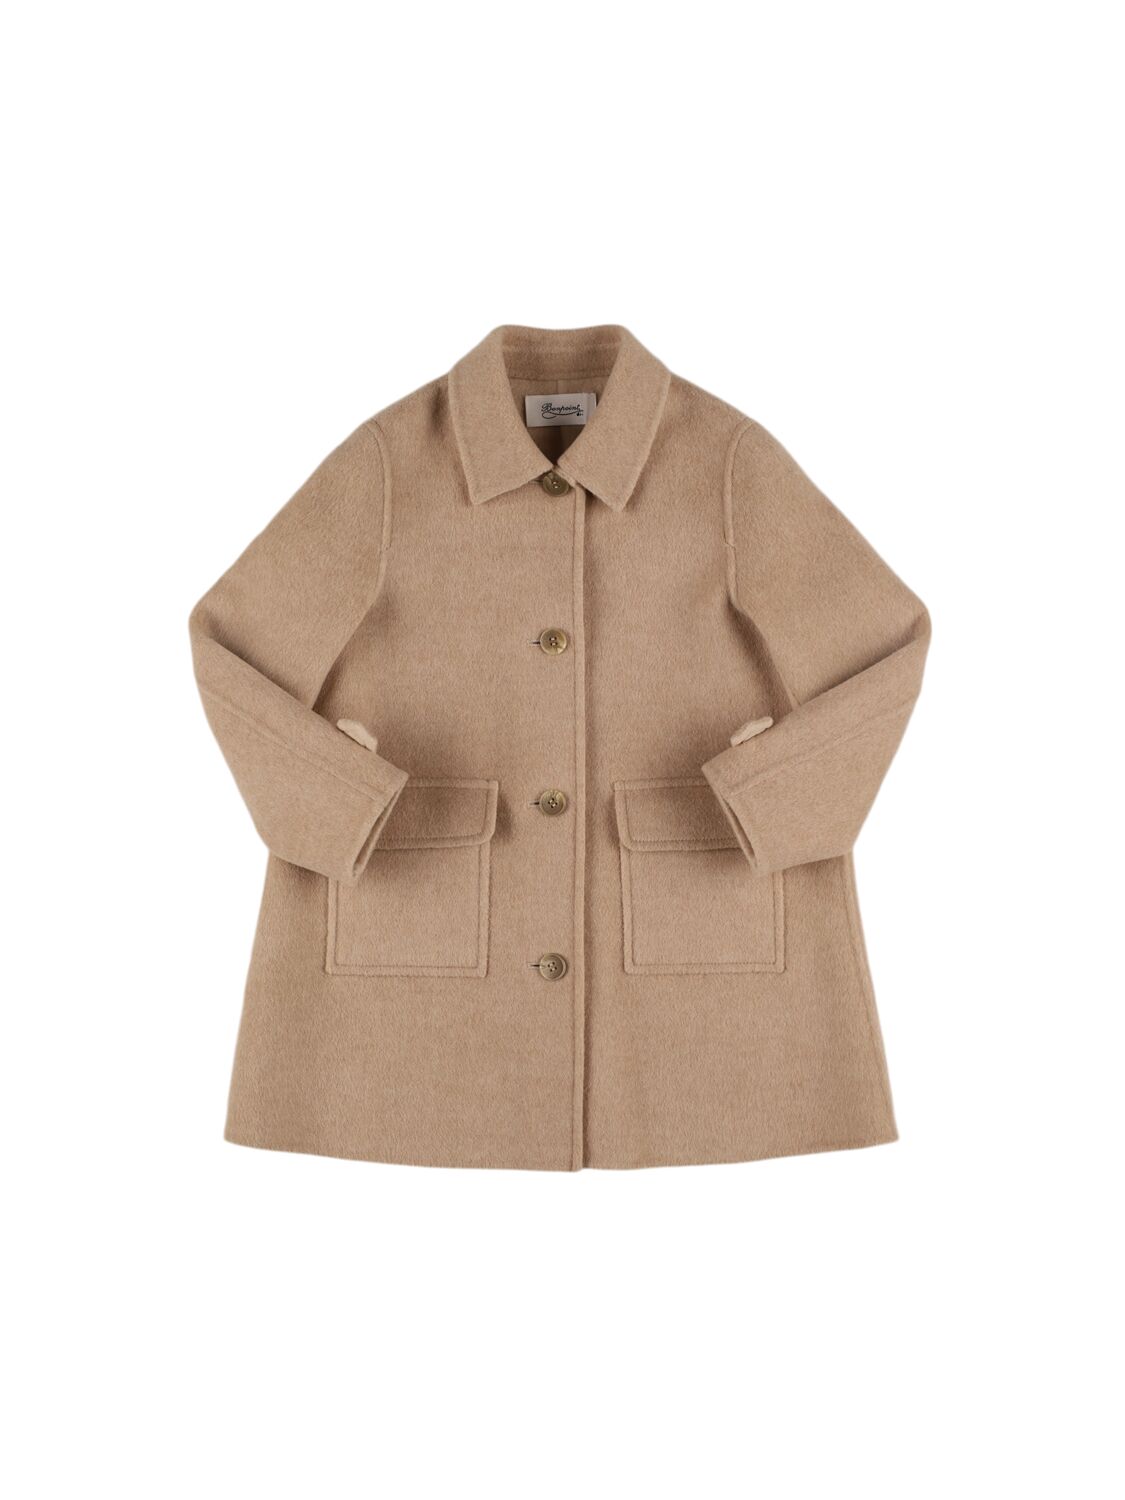 Bonpoint Kids' Wool & Cashmere Coat In Brown